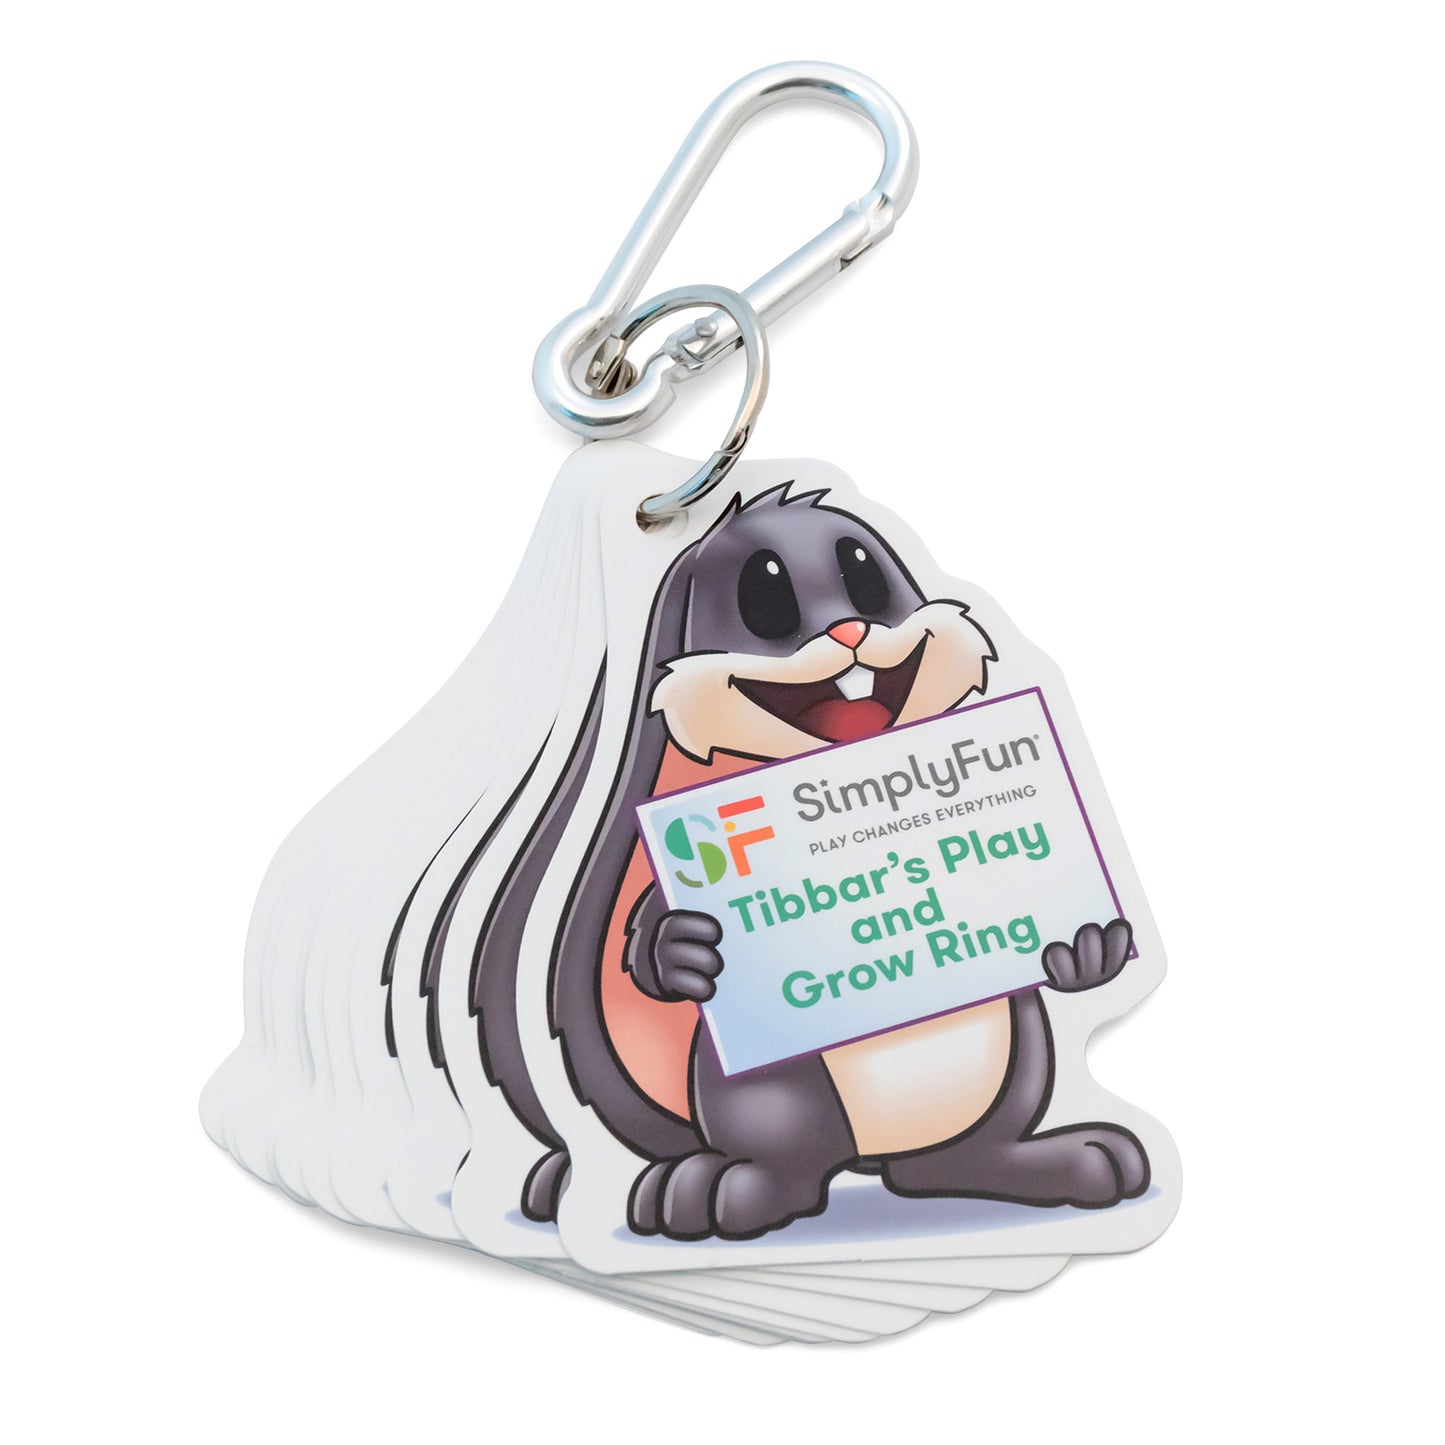 Tibbar’s Head Start Play and Grow Keyring by SimplyFun is full of school readiness identifiers across 9 key areas.